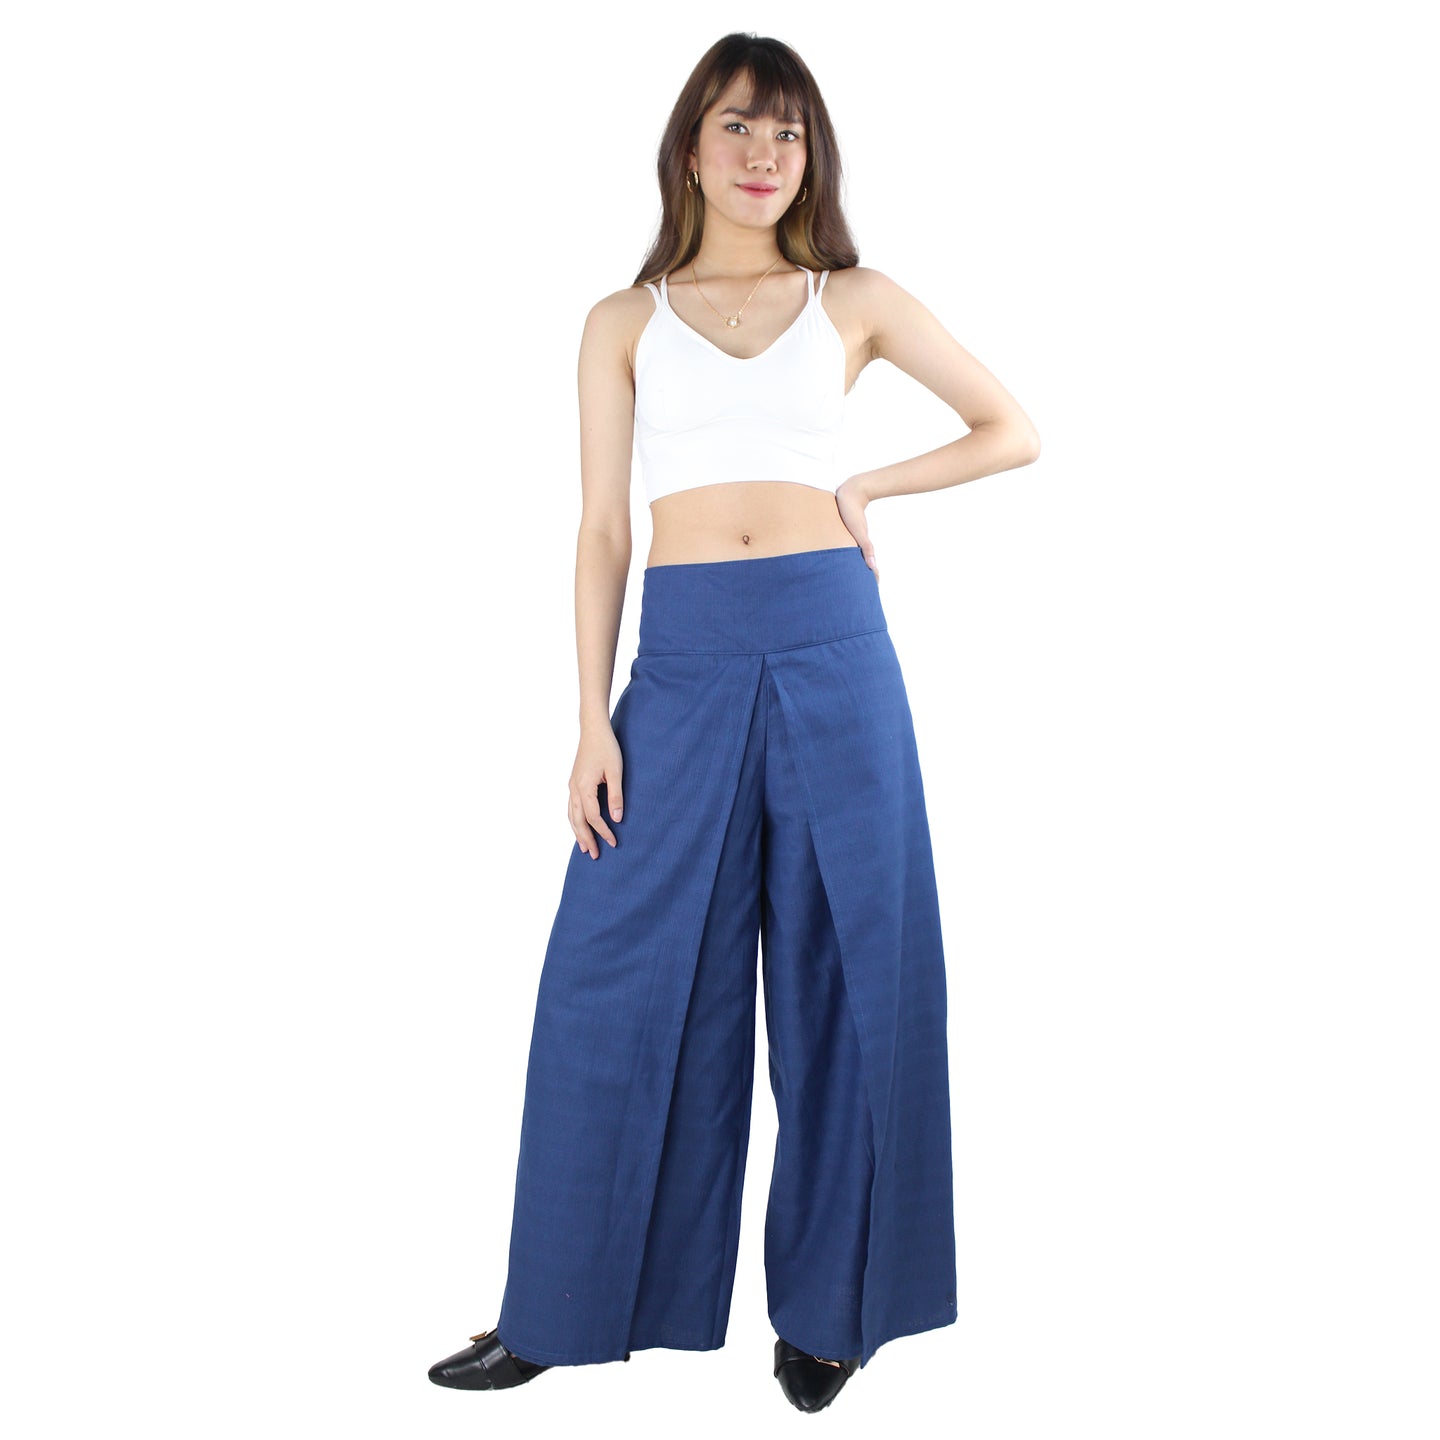 Solid Color Light Cotton Palazzo Pants in Bright Navy PP0076 010000 07